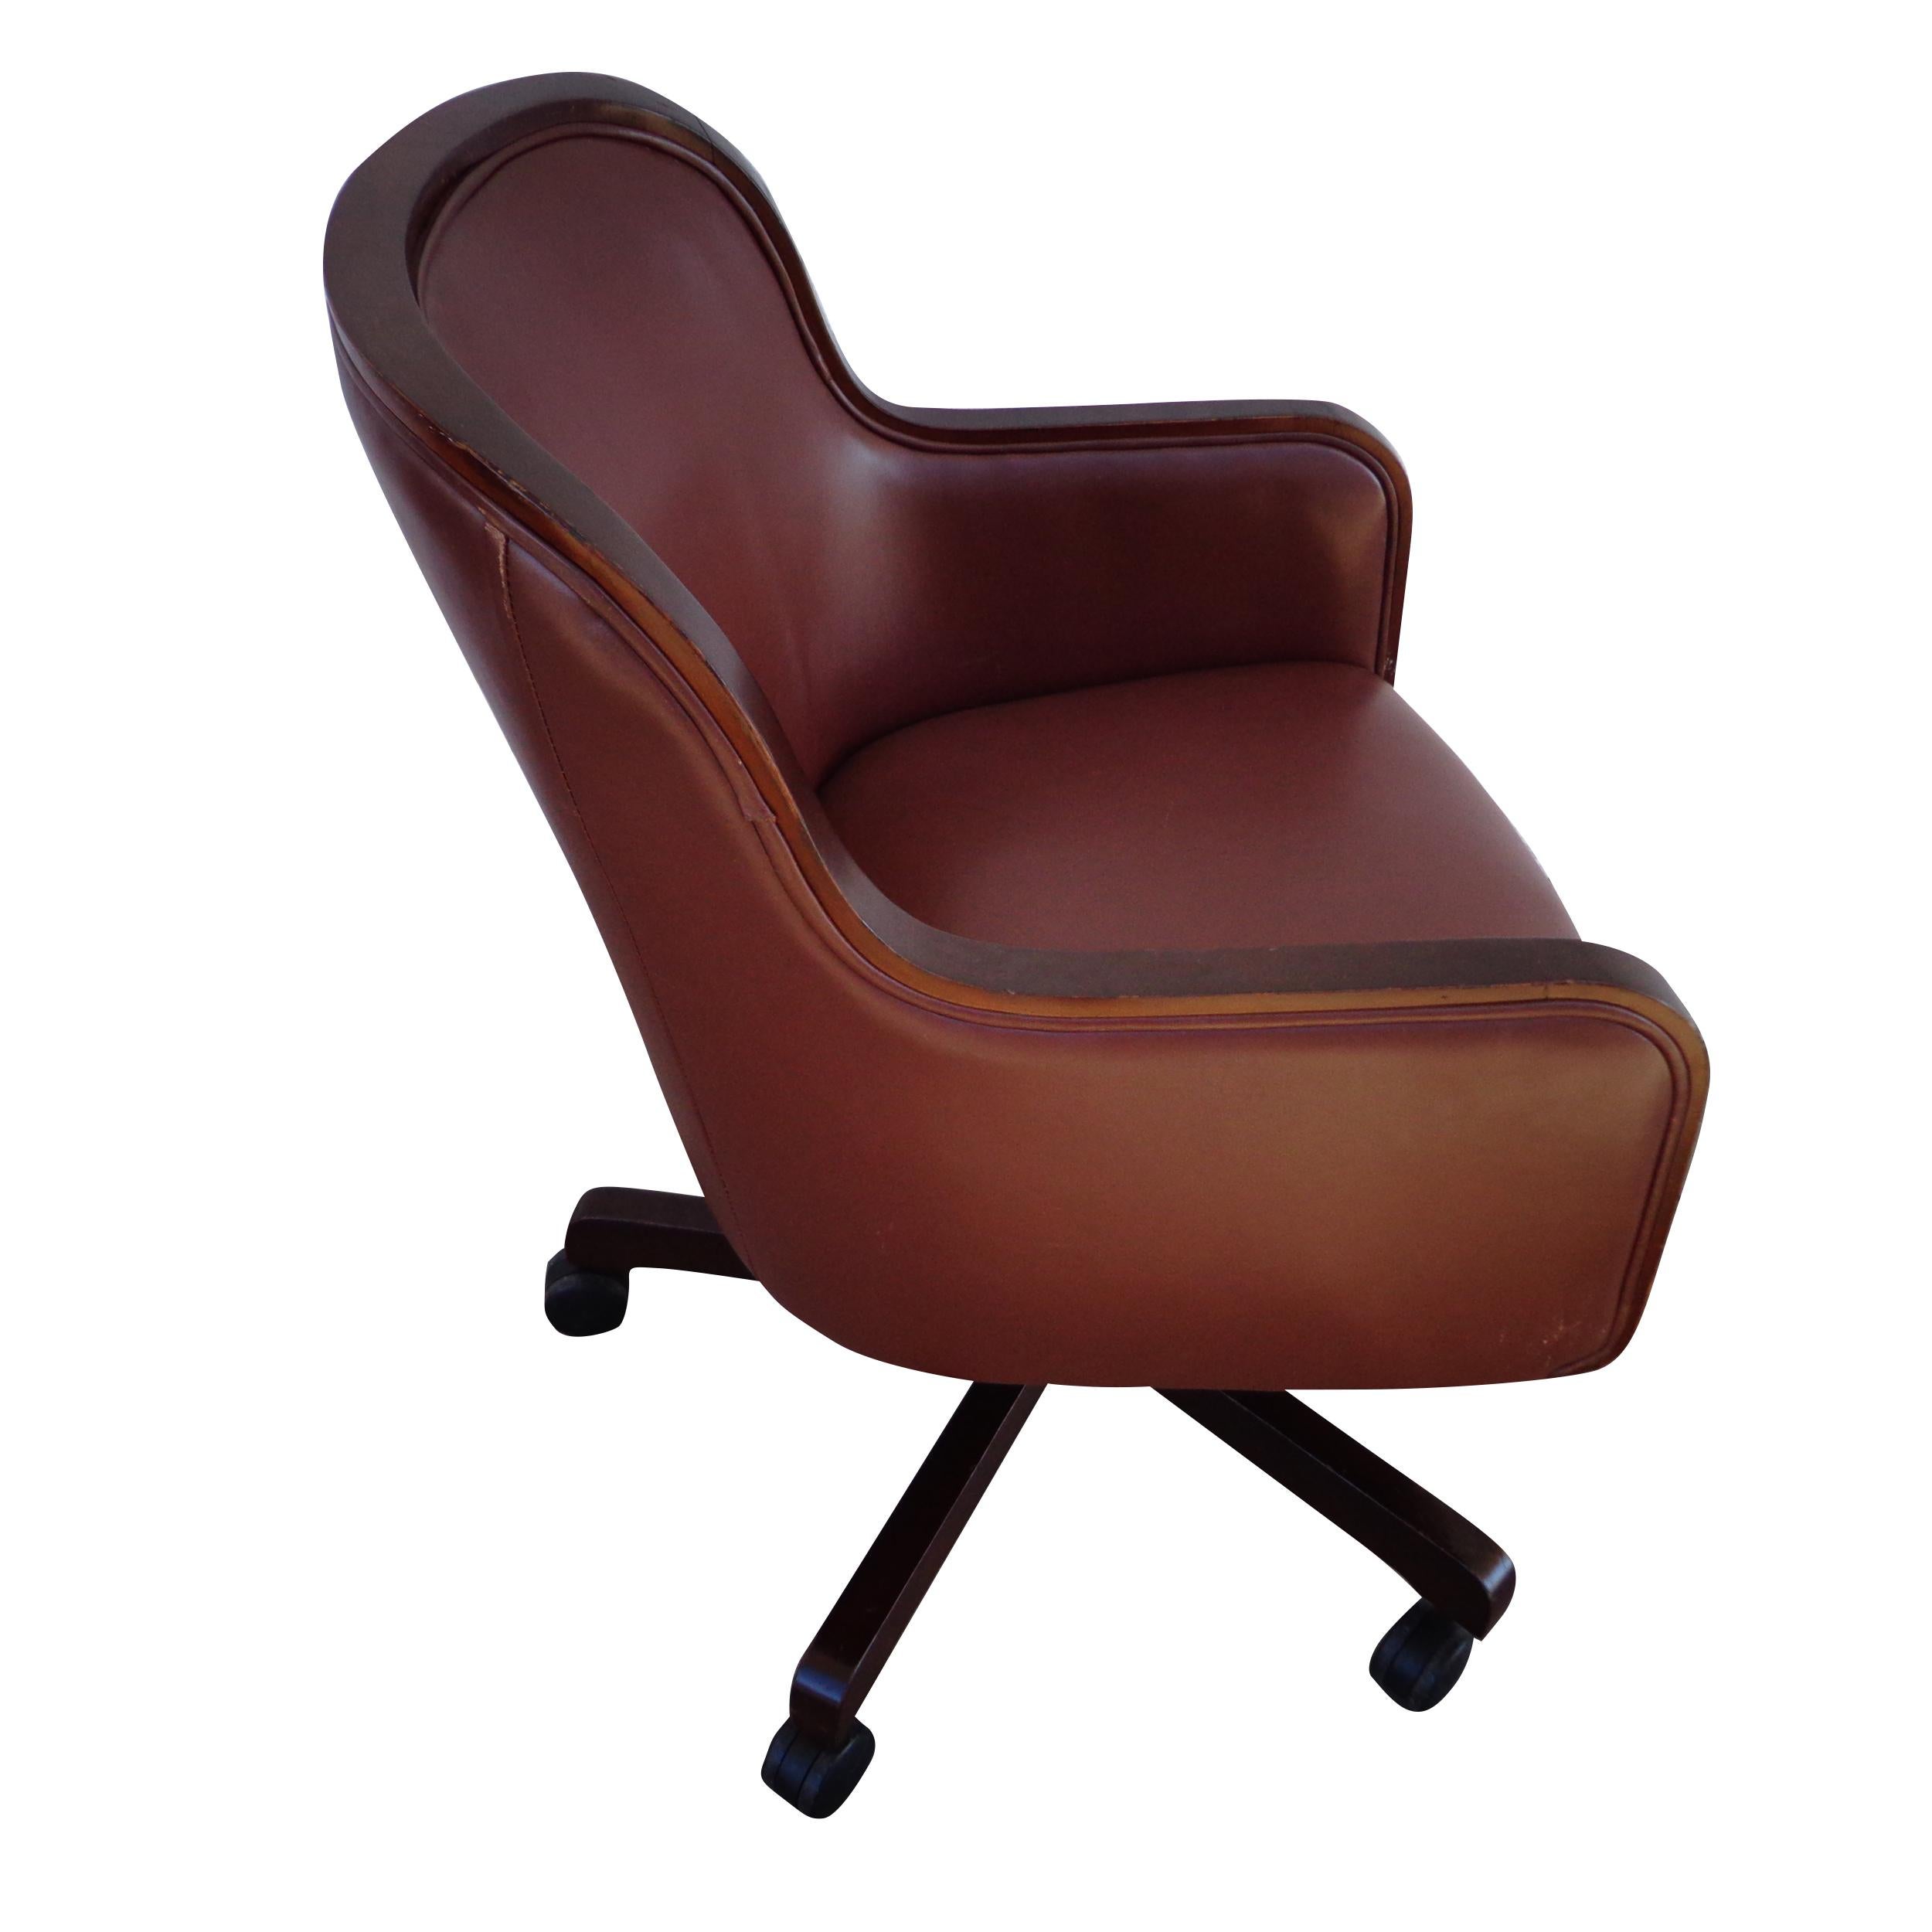  Ward Bennett for Brickel and Associates Barrel-Back leather desk chair 6 available 


 4-star anodized bronze base swivel conference room chair in a brown leather with walnut trim.

Chair swivels and is height adjustable. Six available.